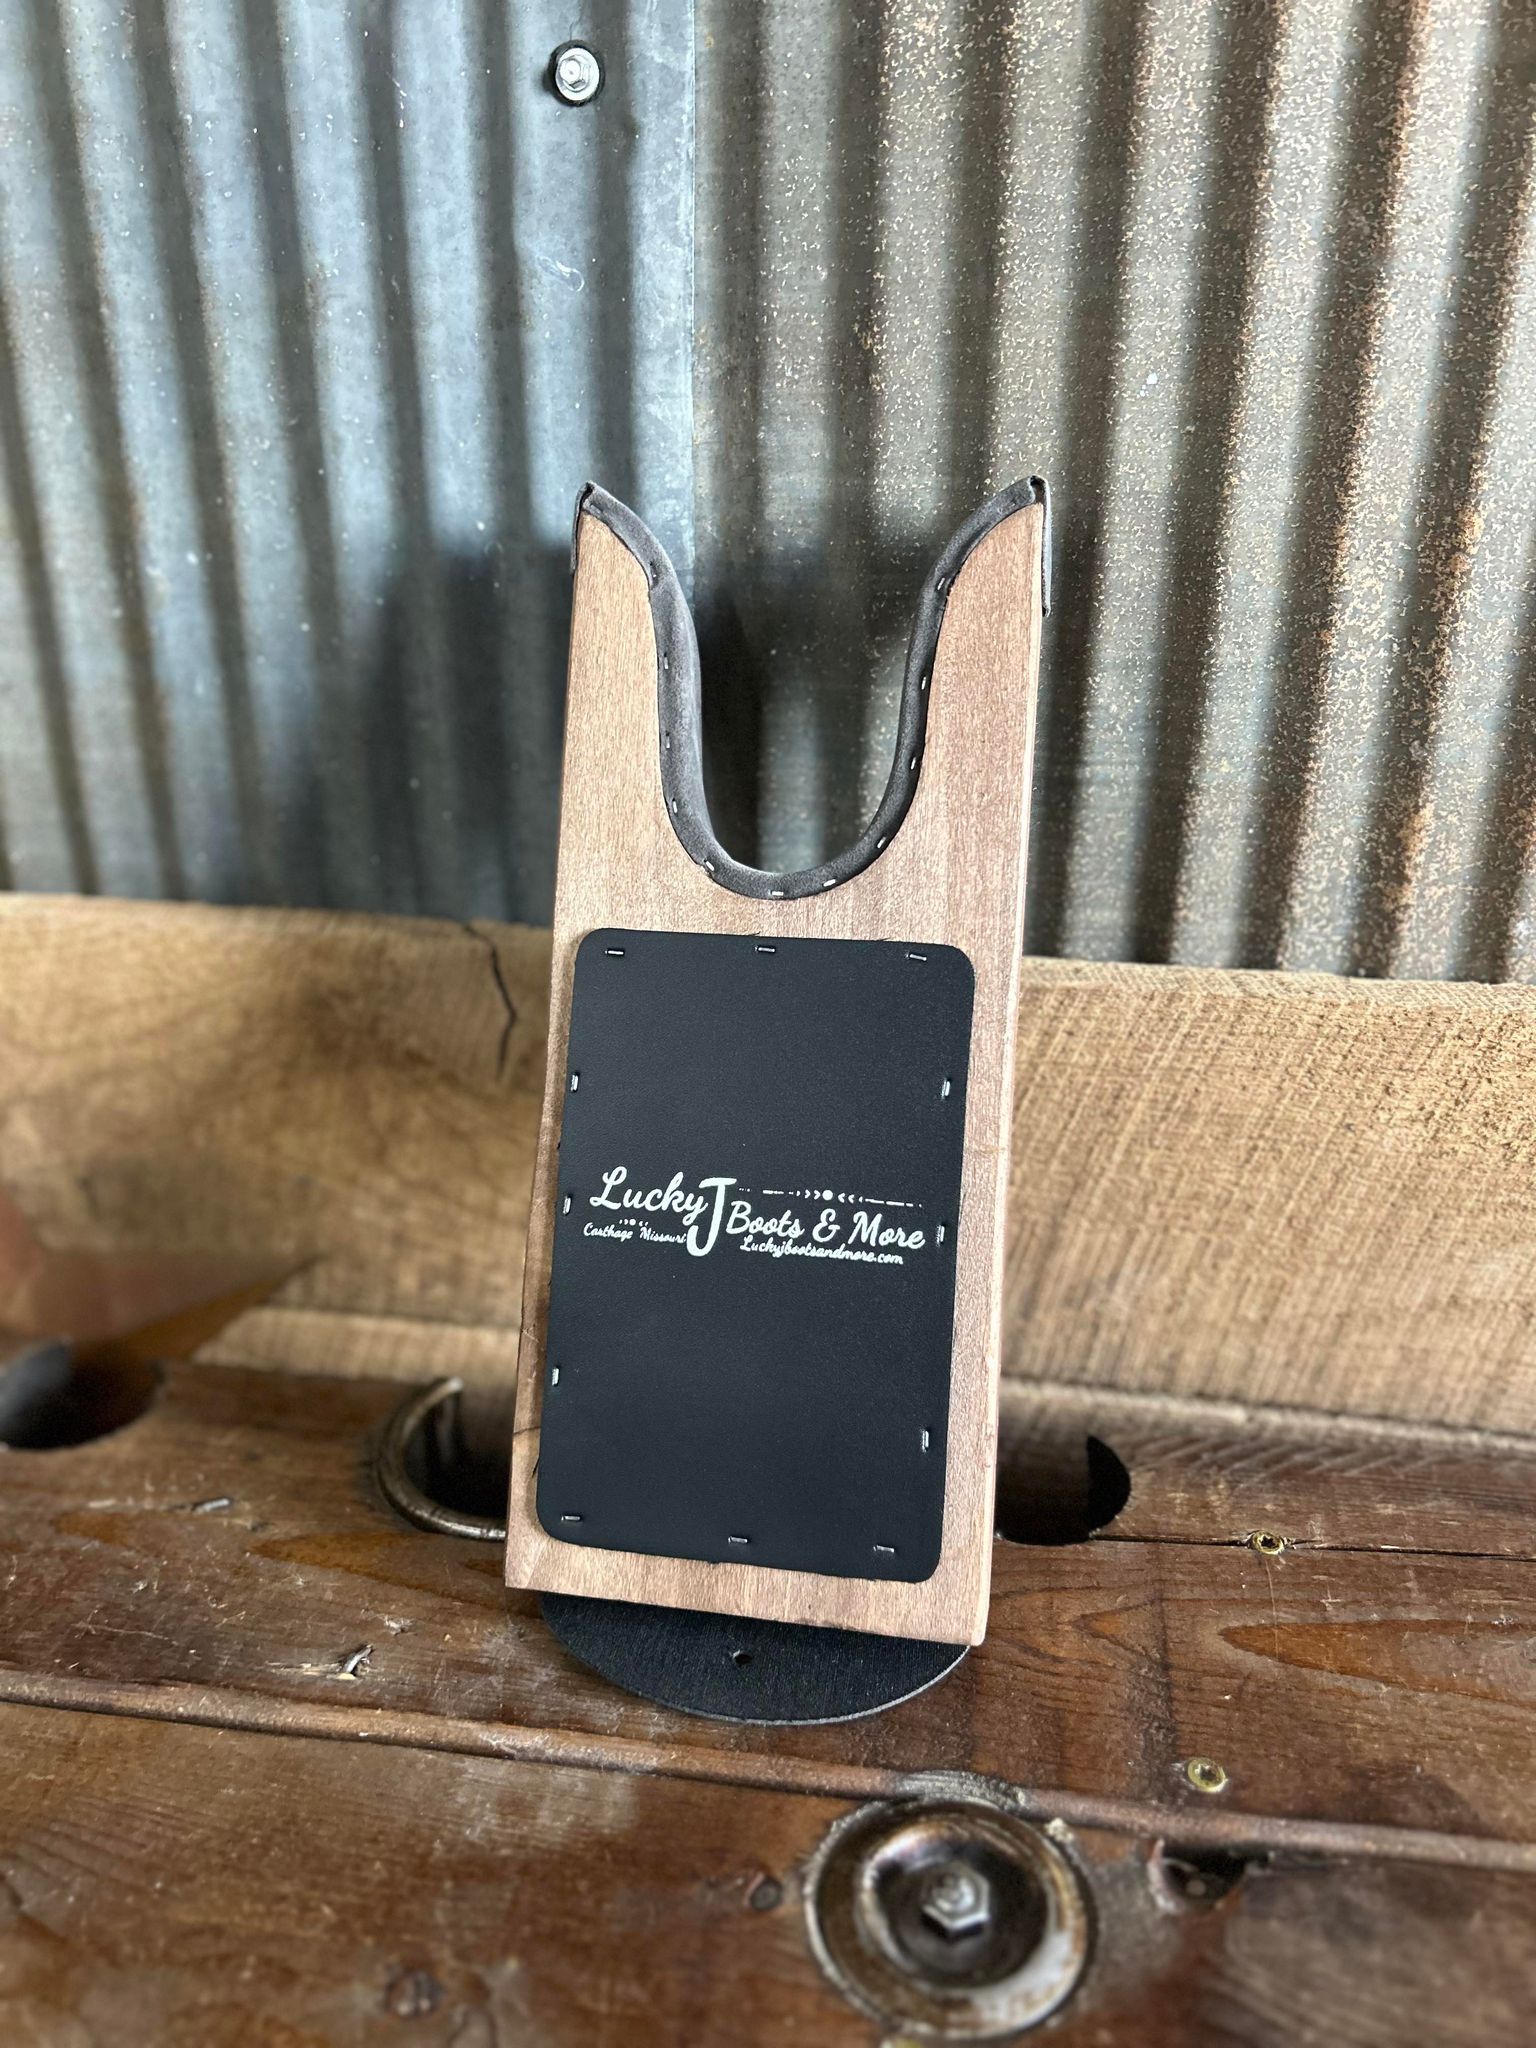 LJ Boot Jacks-Boot Jack-M & F Western Products-Lucky J Boots & More, Women's, Men's, & Kids Western Store Located in Carthage, MO